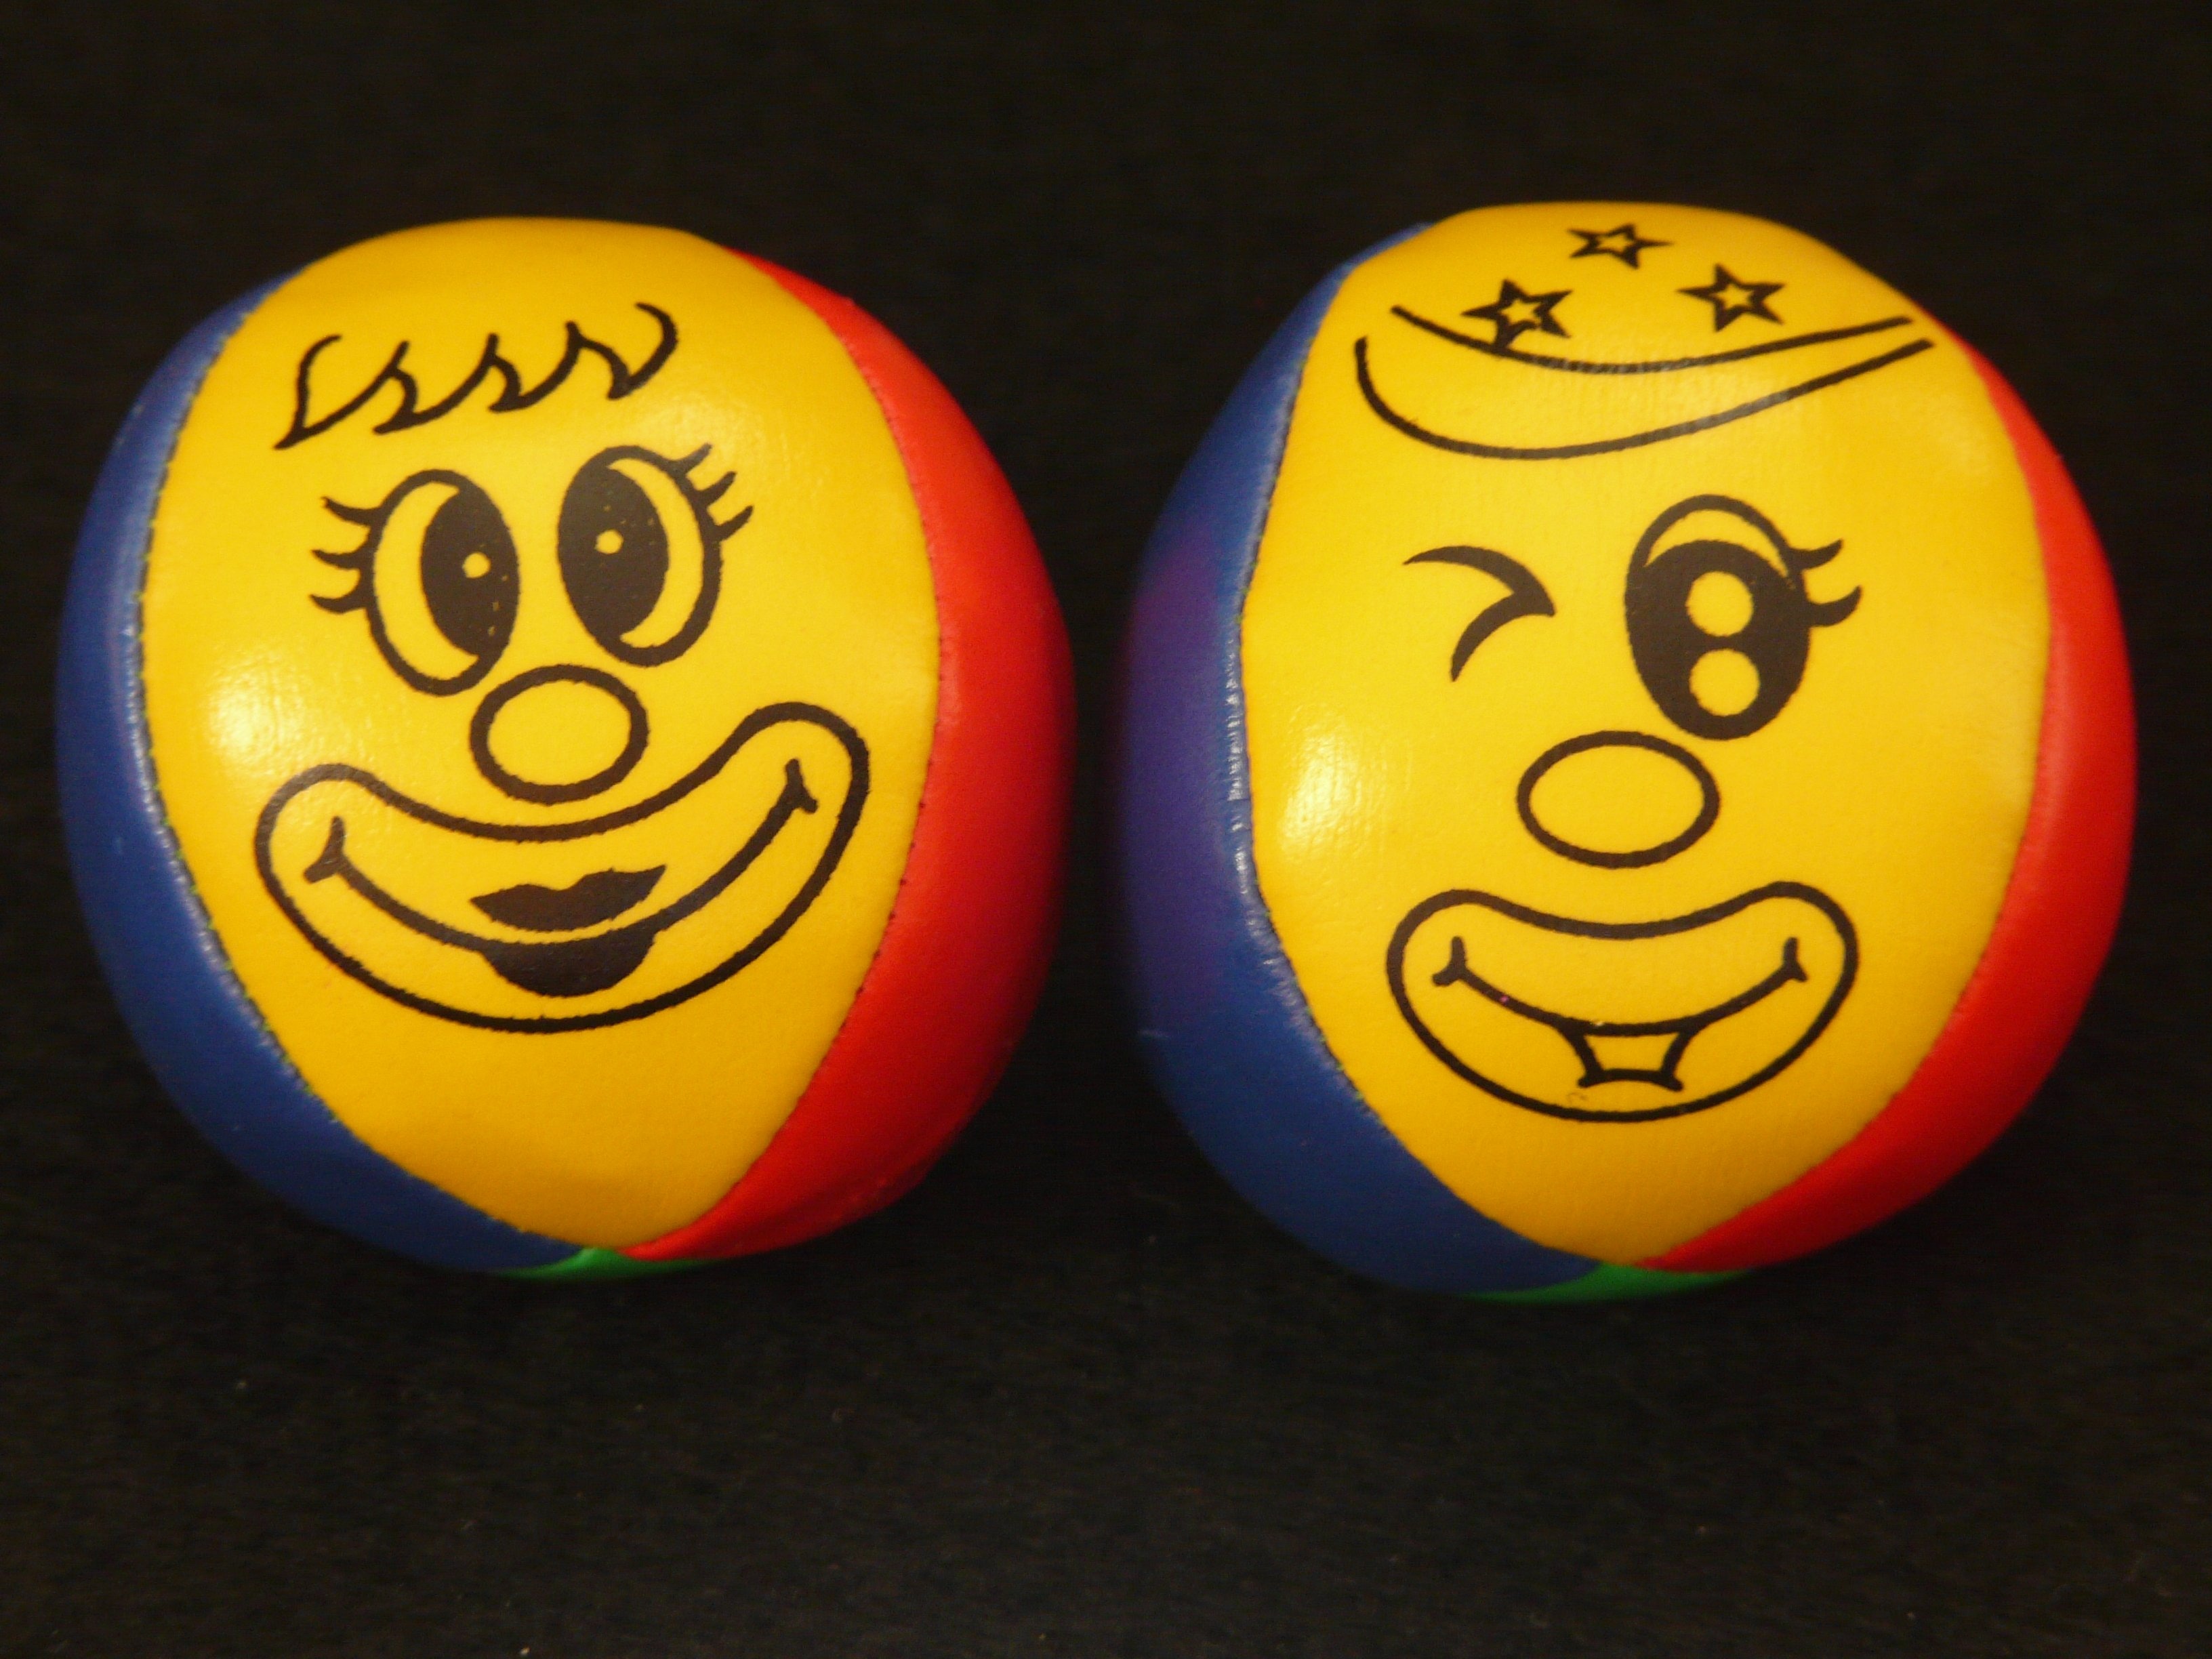 2 yellow blue and red ball